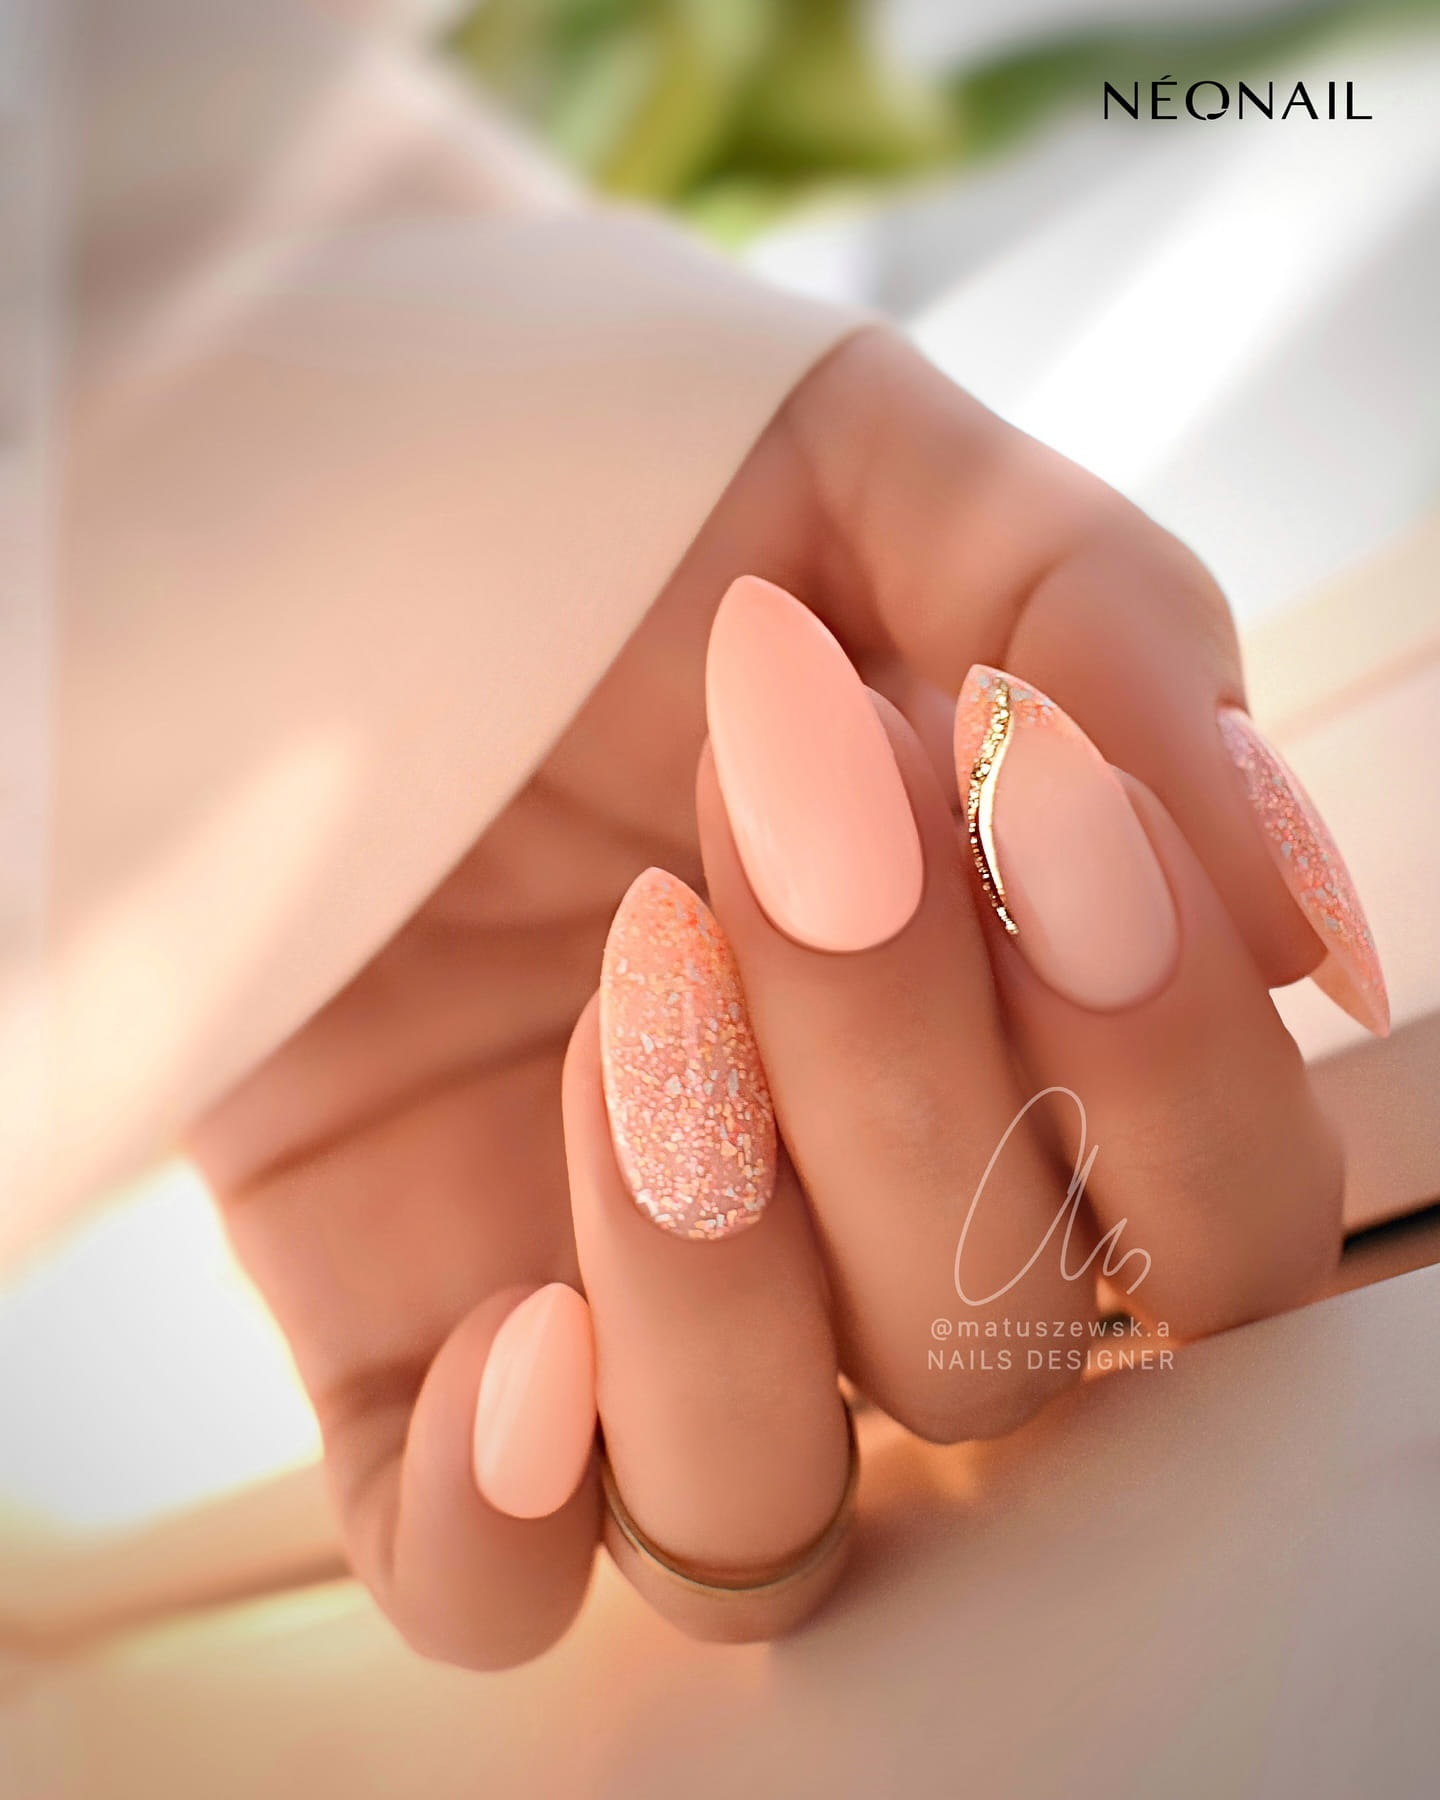 100 Pretty Spring Nail Designs To Try This Year images 75